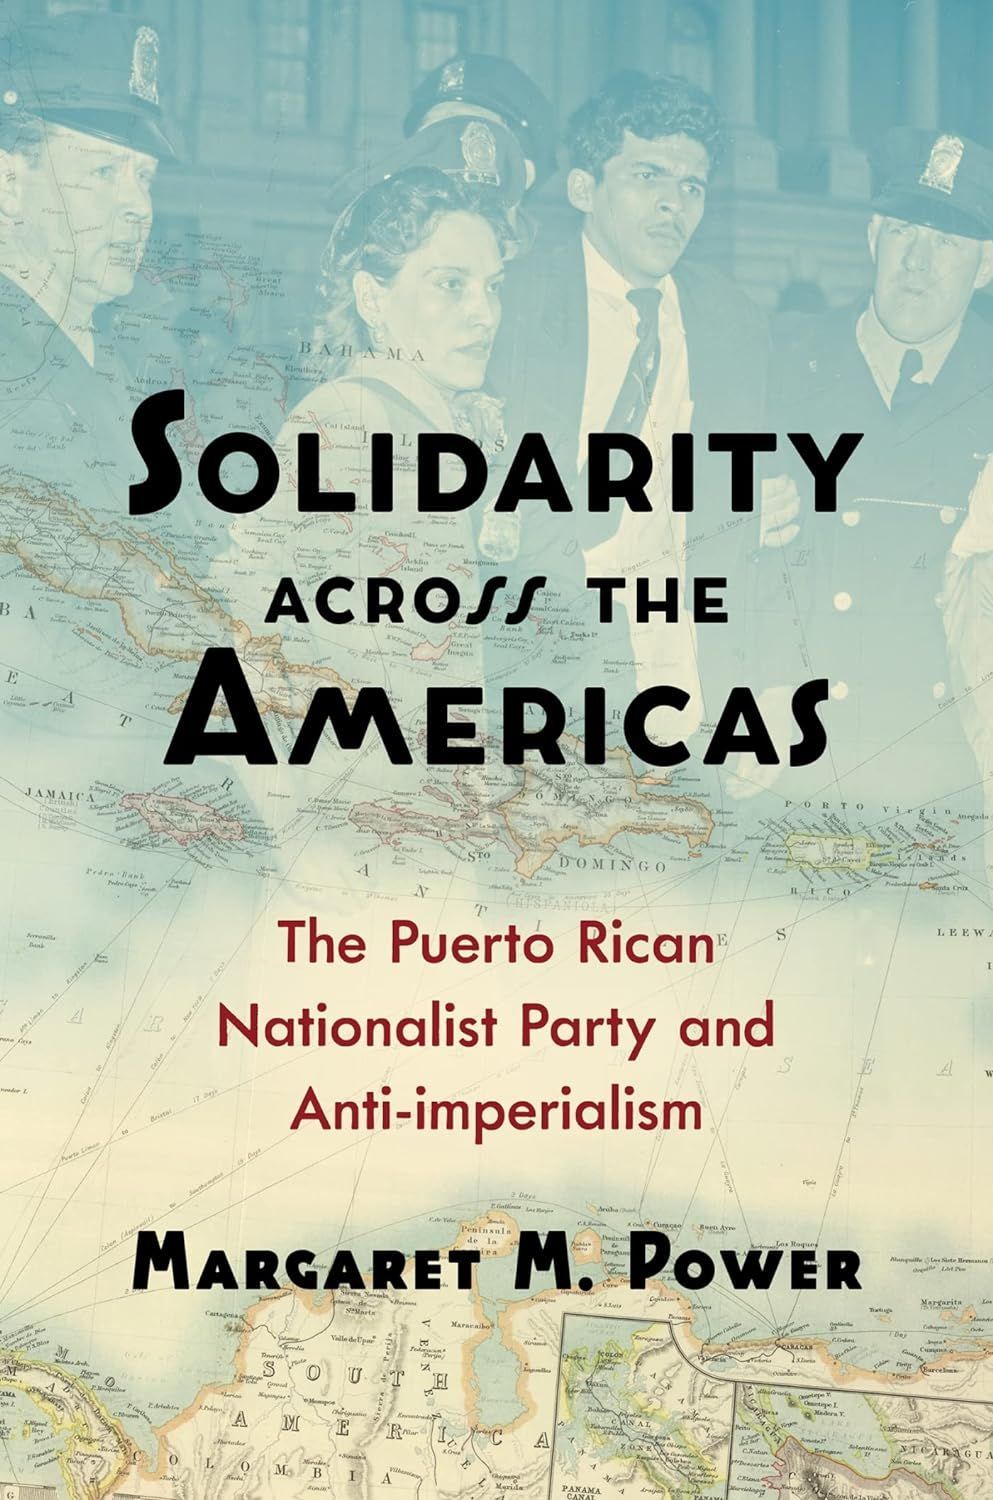 A More Camouflaged Colony: On Margaret M. Power’s “Solidarity Across the Americas”